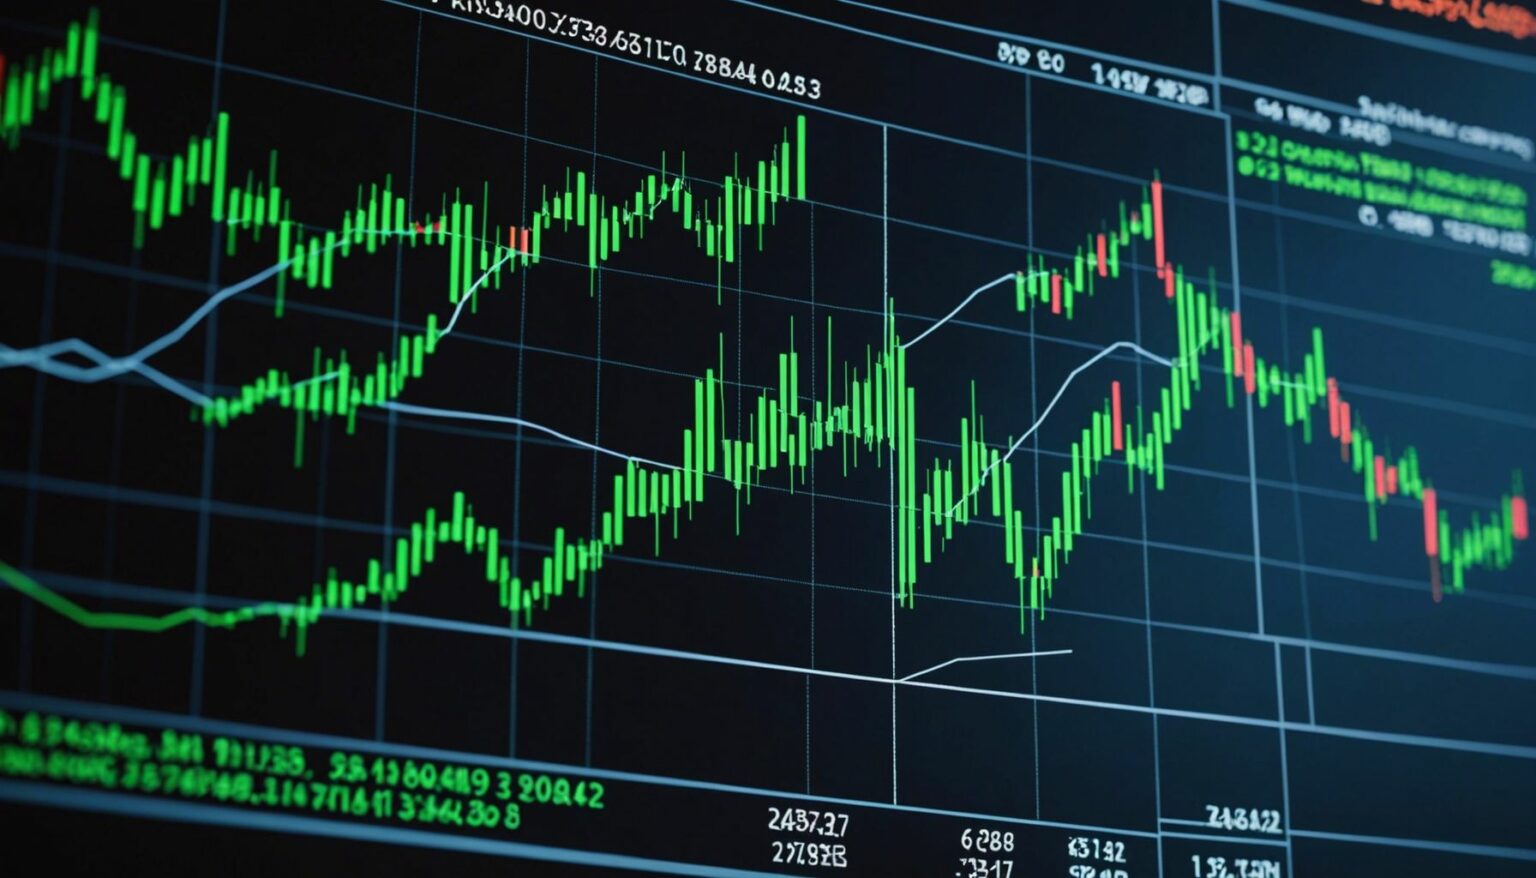 Stock market chart with rapid movements, representing fast-paced scalping trading strategies for quick profits.